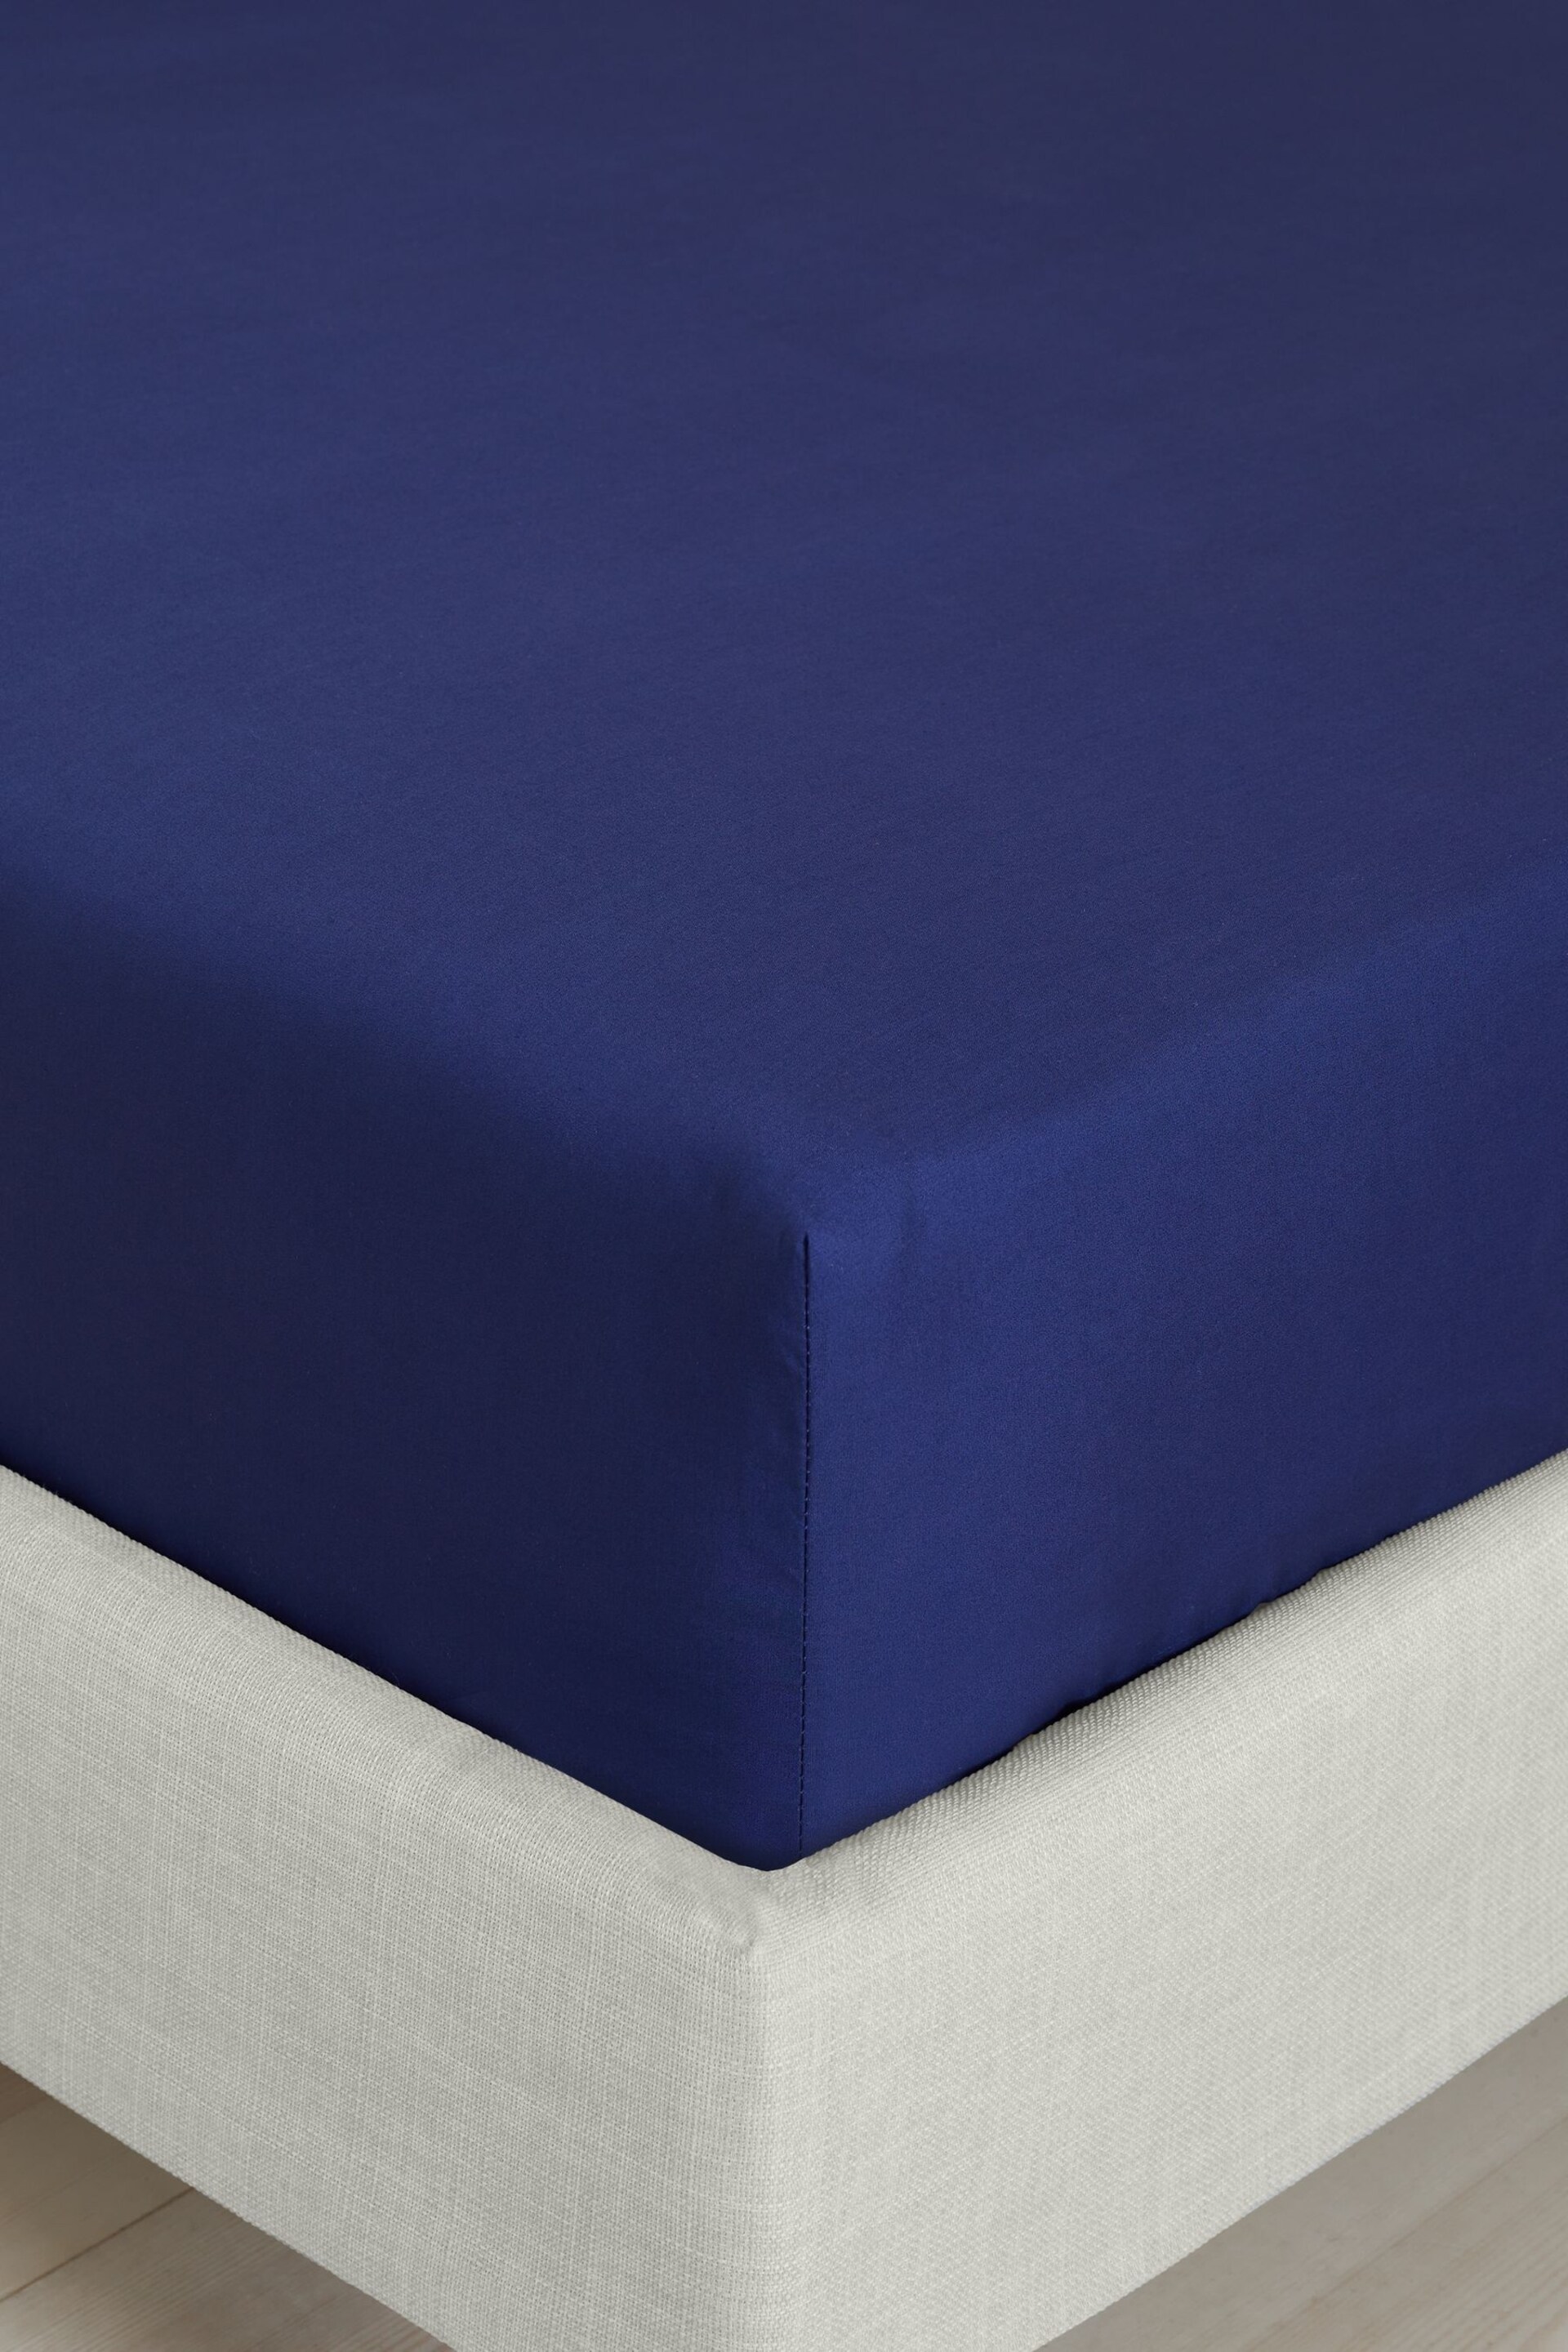 Bianca Navy Blue 200 Thread Count Cotton Percale Deep Fitted Sheet - Image 1 of 4